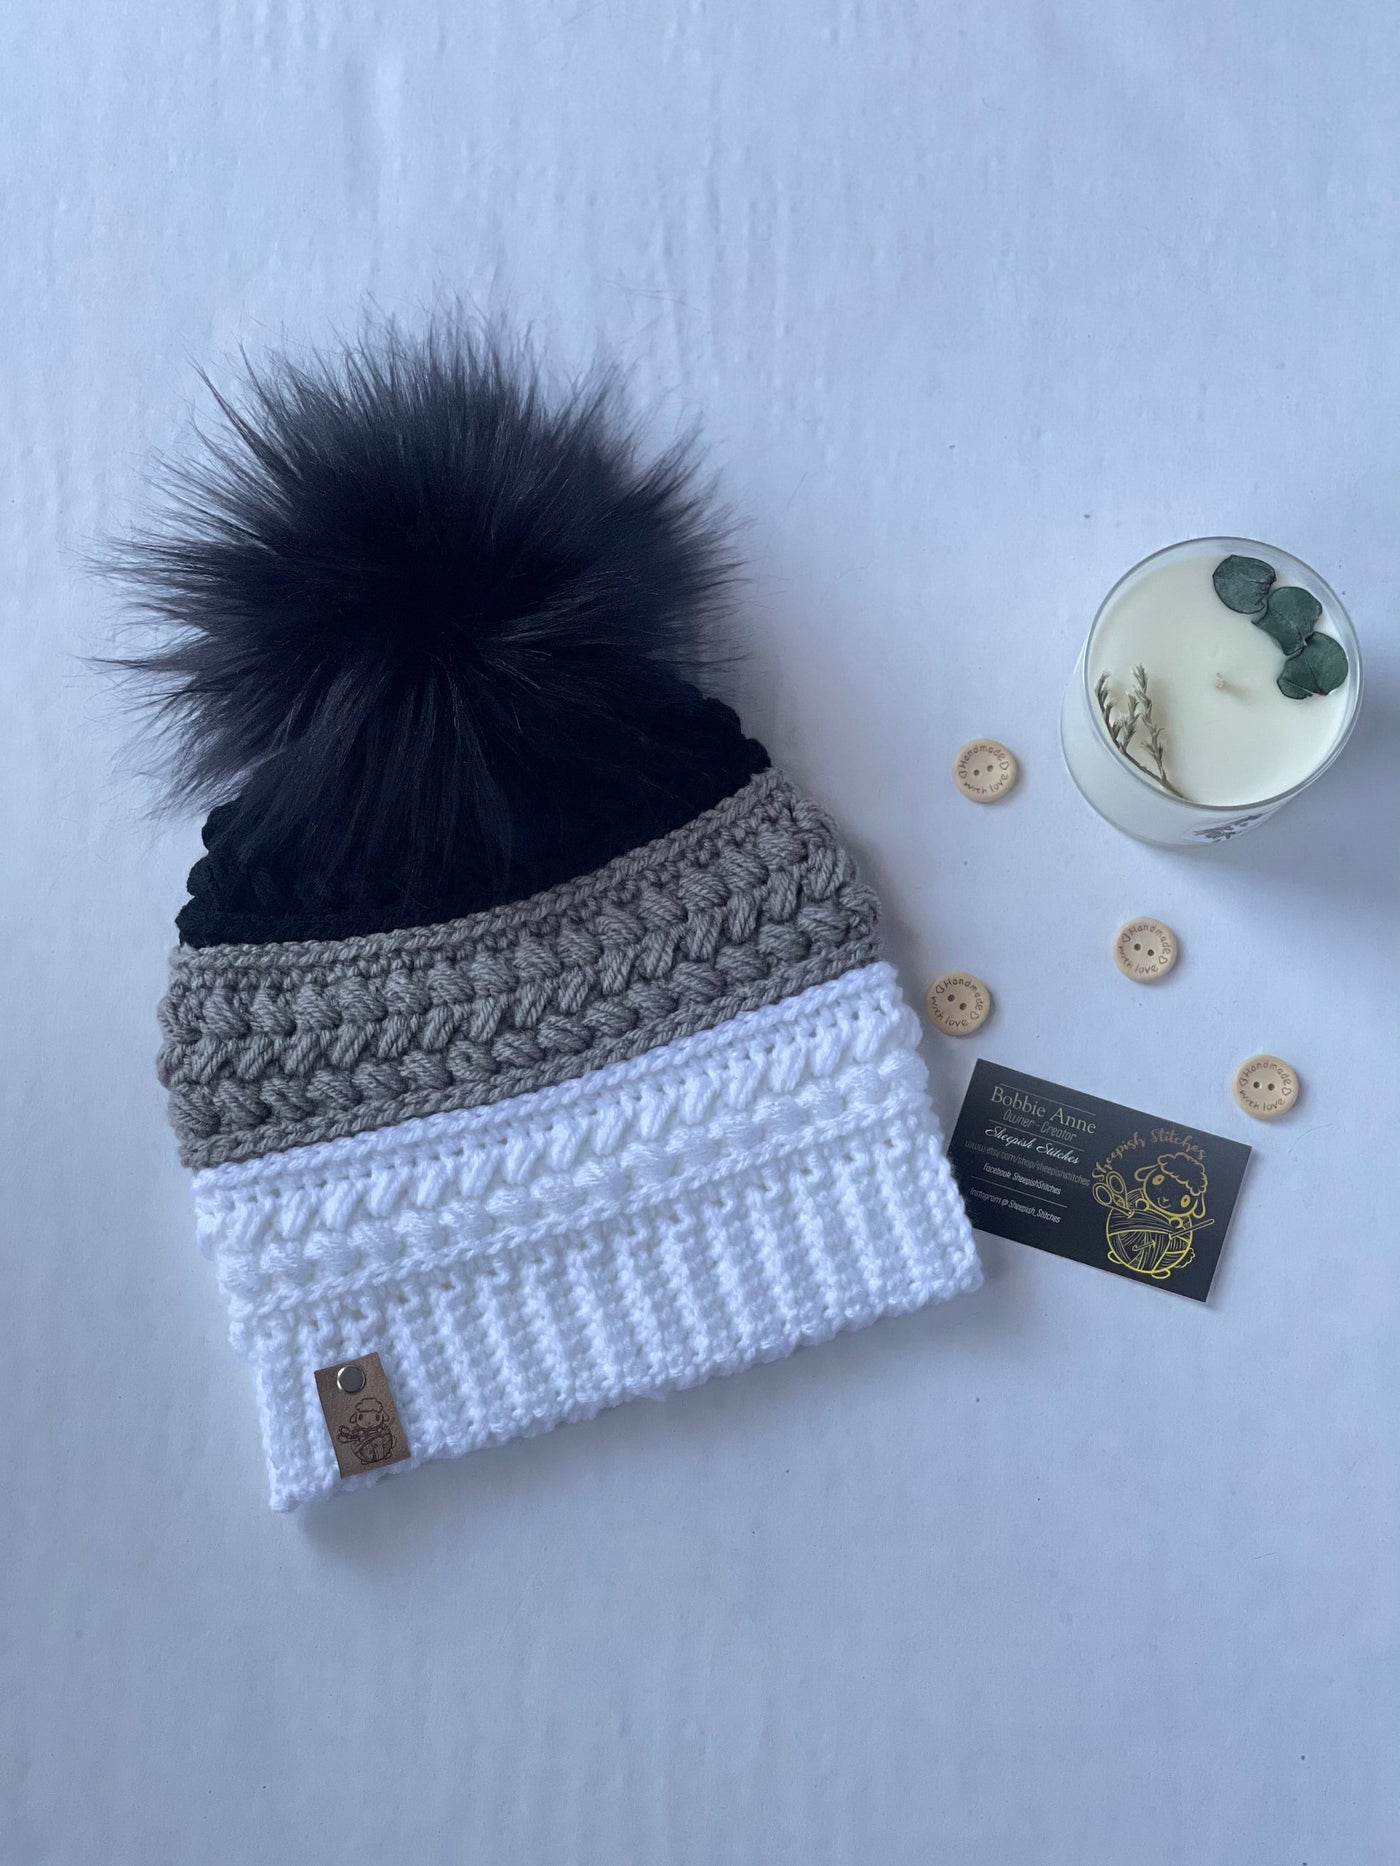 Black, Gray, White Hand Crocheted Beanie with faux fur Pom Pom, toque, hat, cap, woman’s gifts